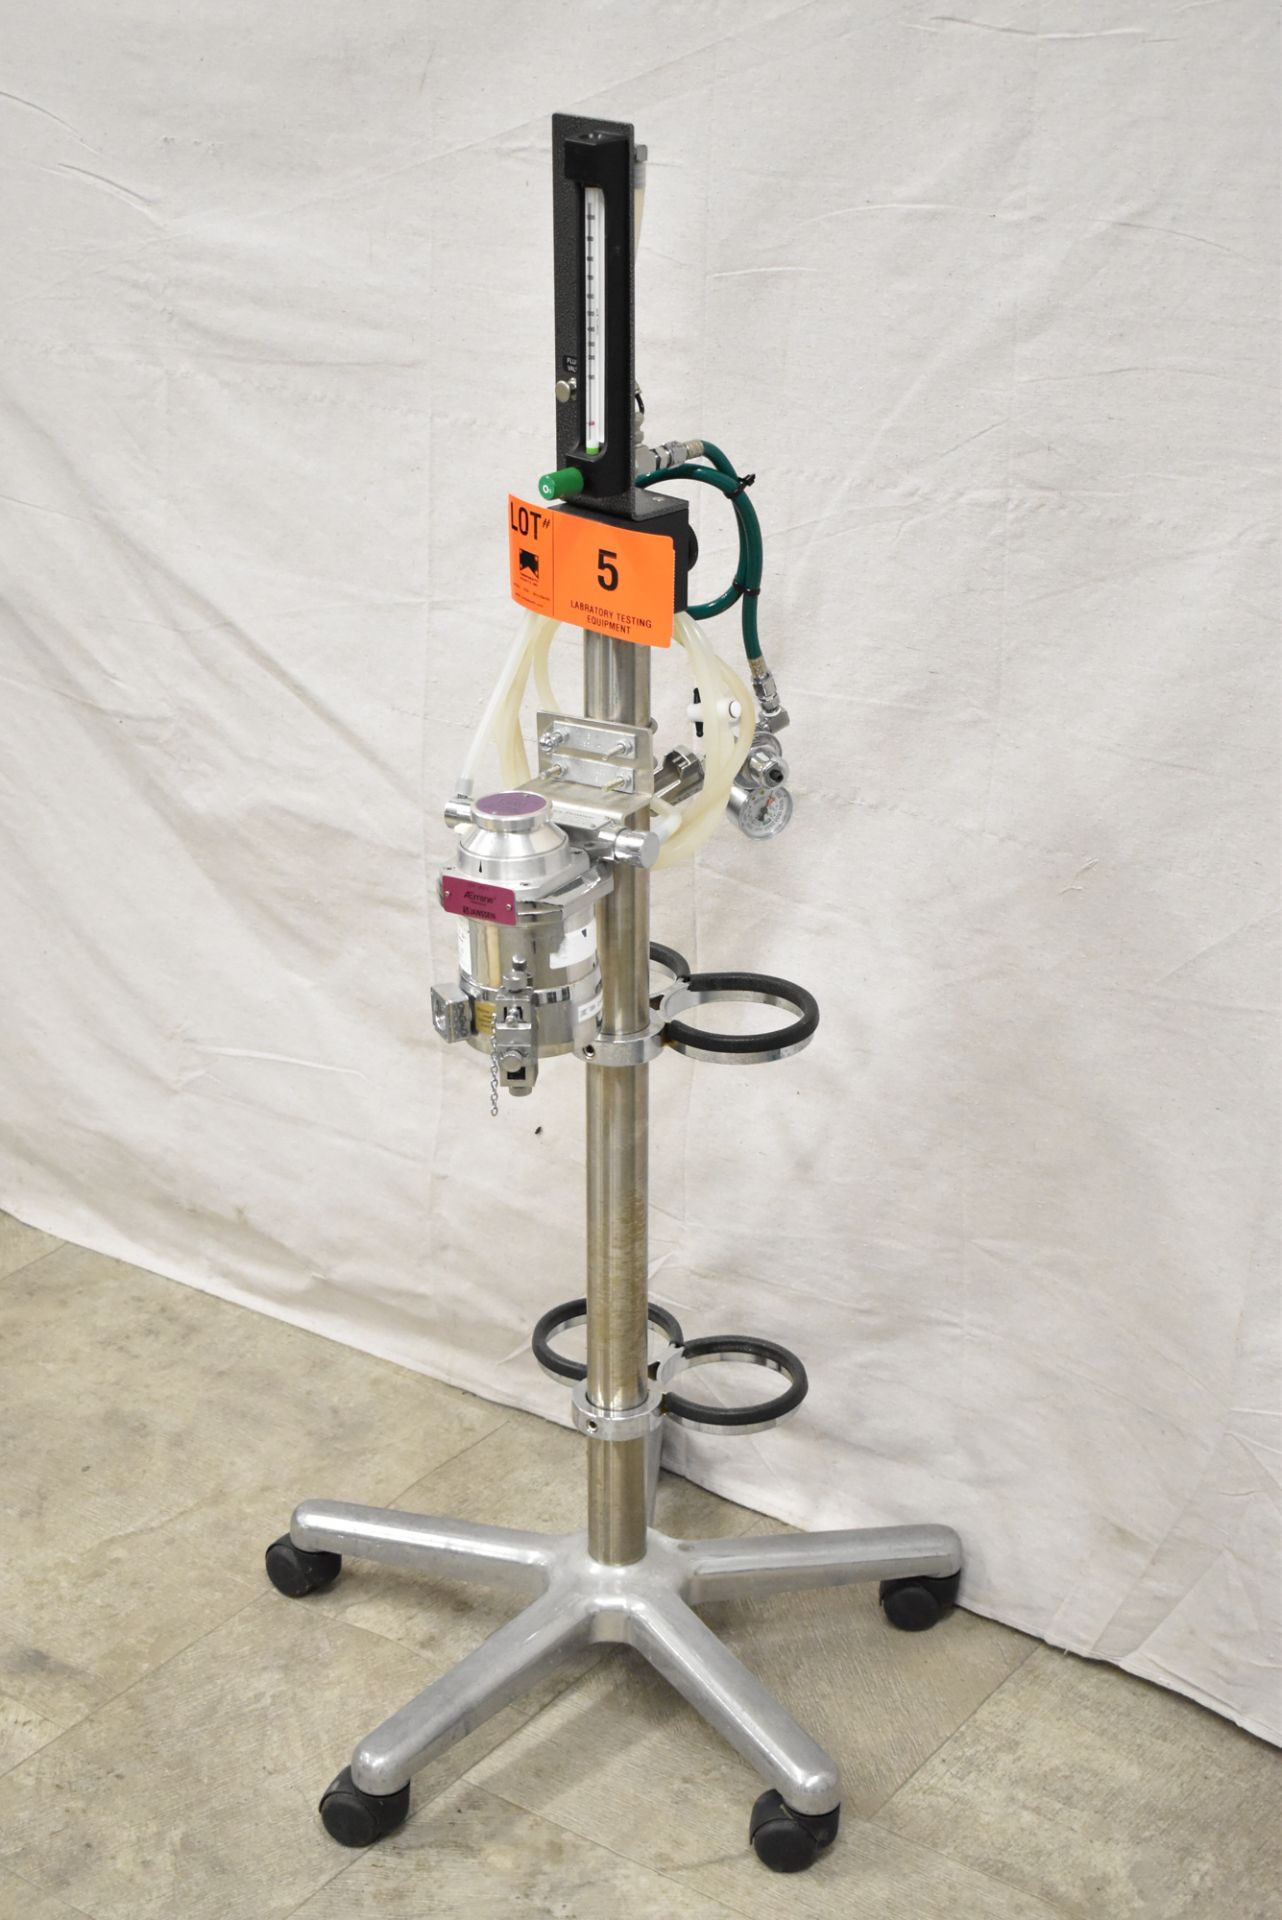 RIVER MEDICAL ENGINEERING T3ISO ISOFLURANE VAPORIZER AND FLOW METER ANESTHESIA UNIT WITH HOSES, - Image 5 of 8